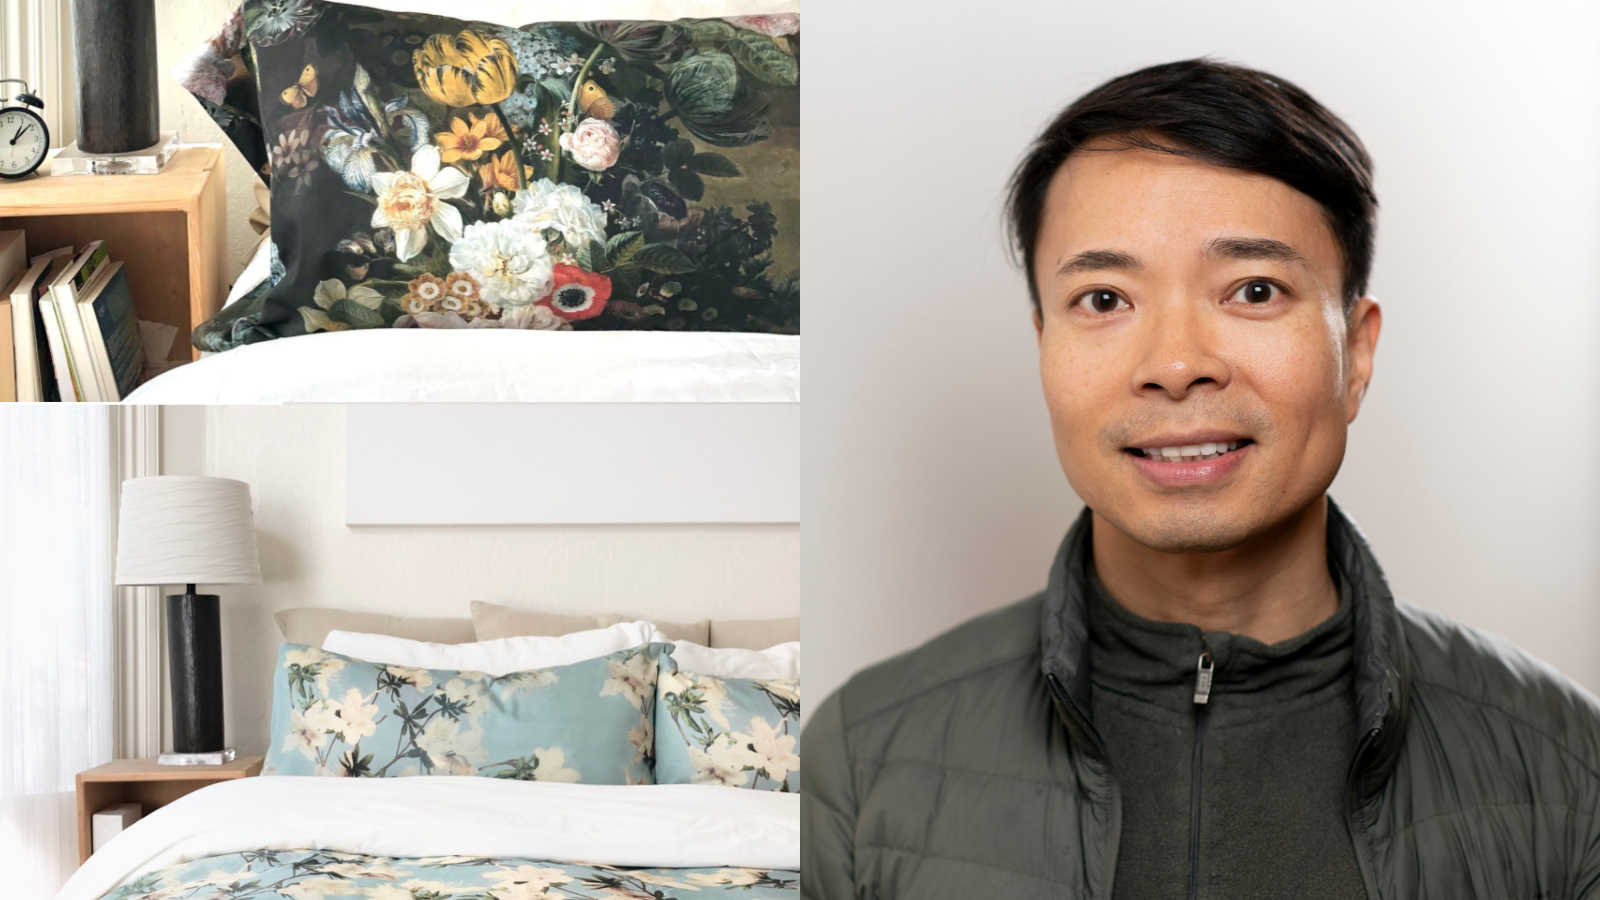 AAPI Entrepreneur Highlight: How David Lee Incorporates Art and Culture into Pillows and Throws